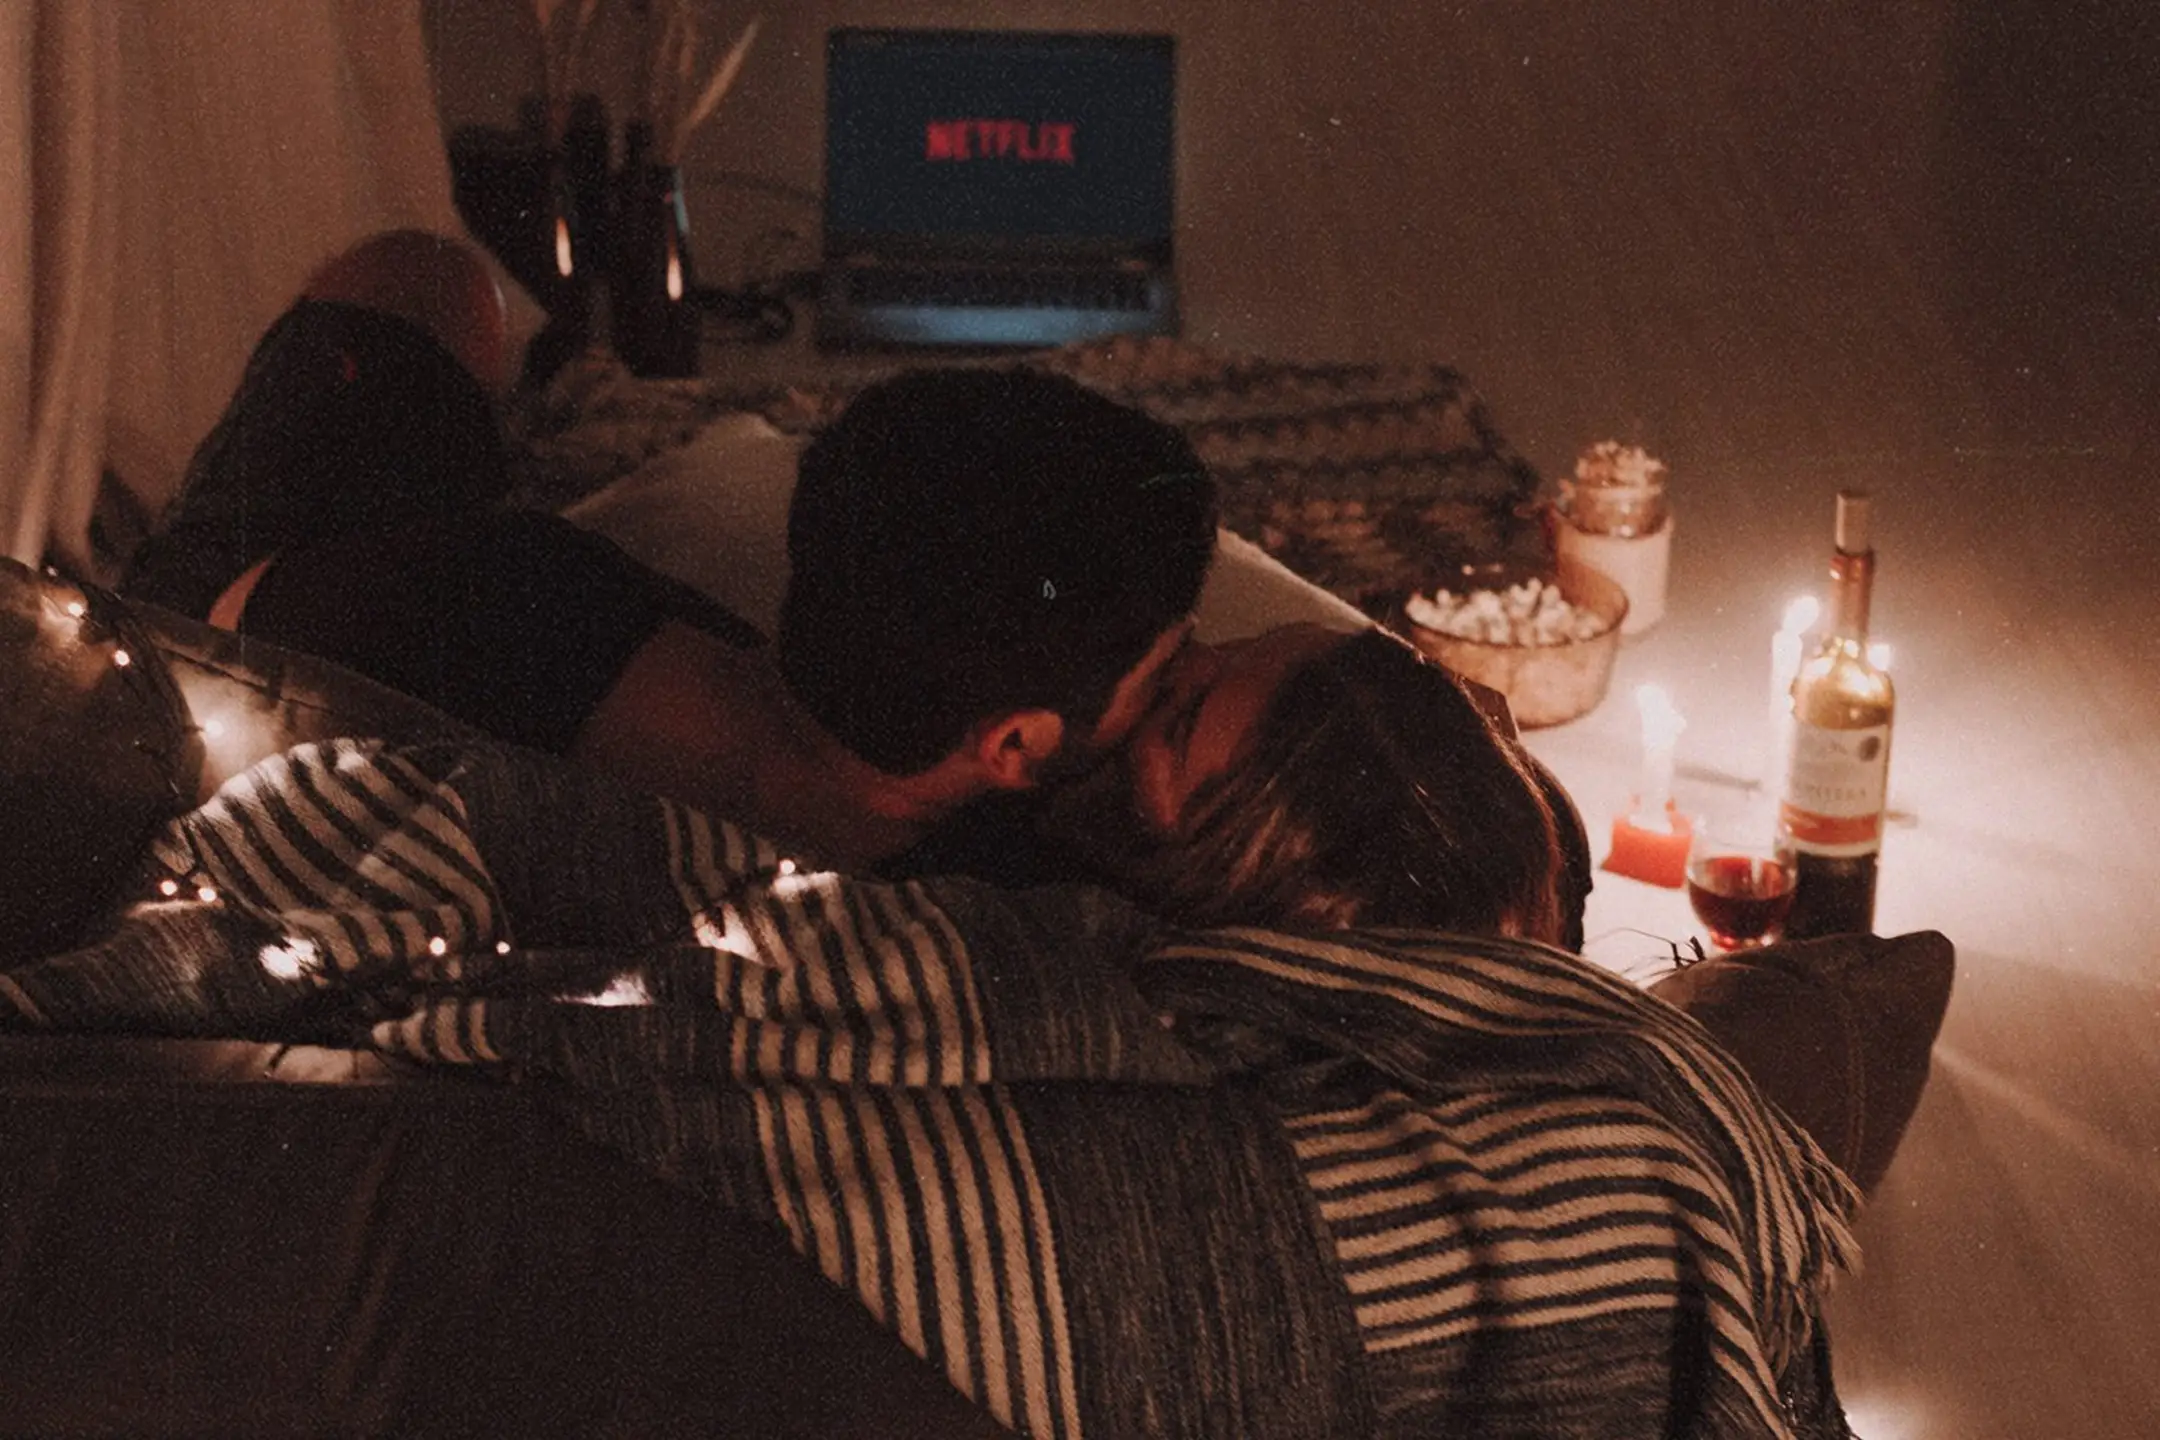 A couple is lying down in a cozy embrace, illuminated by the soft glow of string lights, with a laptop showing Netflix in the background. A romantic setting is enhanced by a bottle of wine, a glass, and candles, creating an intimate atmosphere for a movie night.